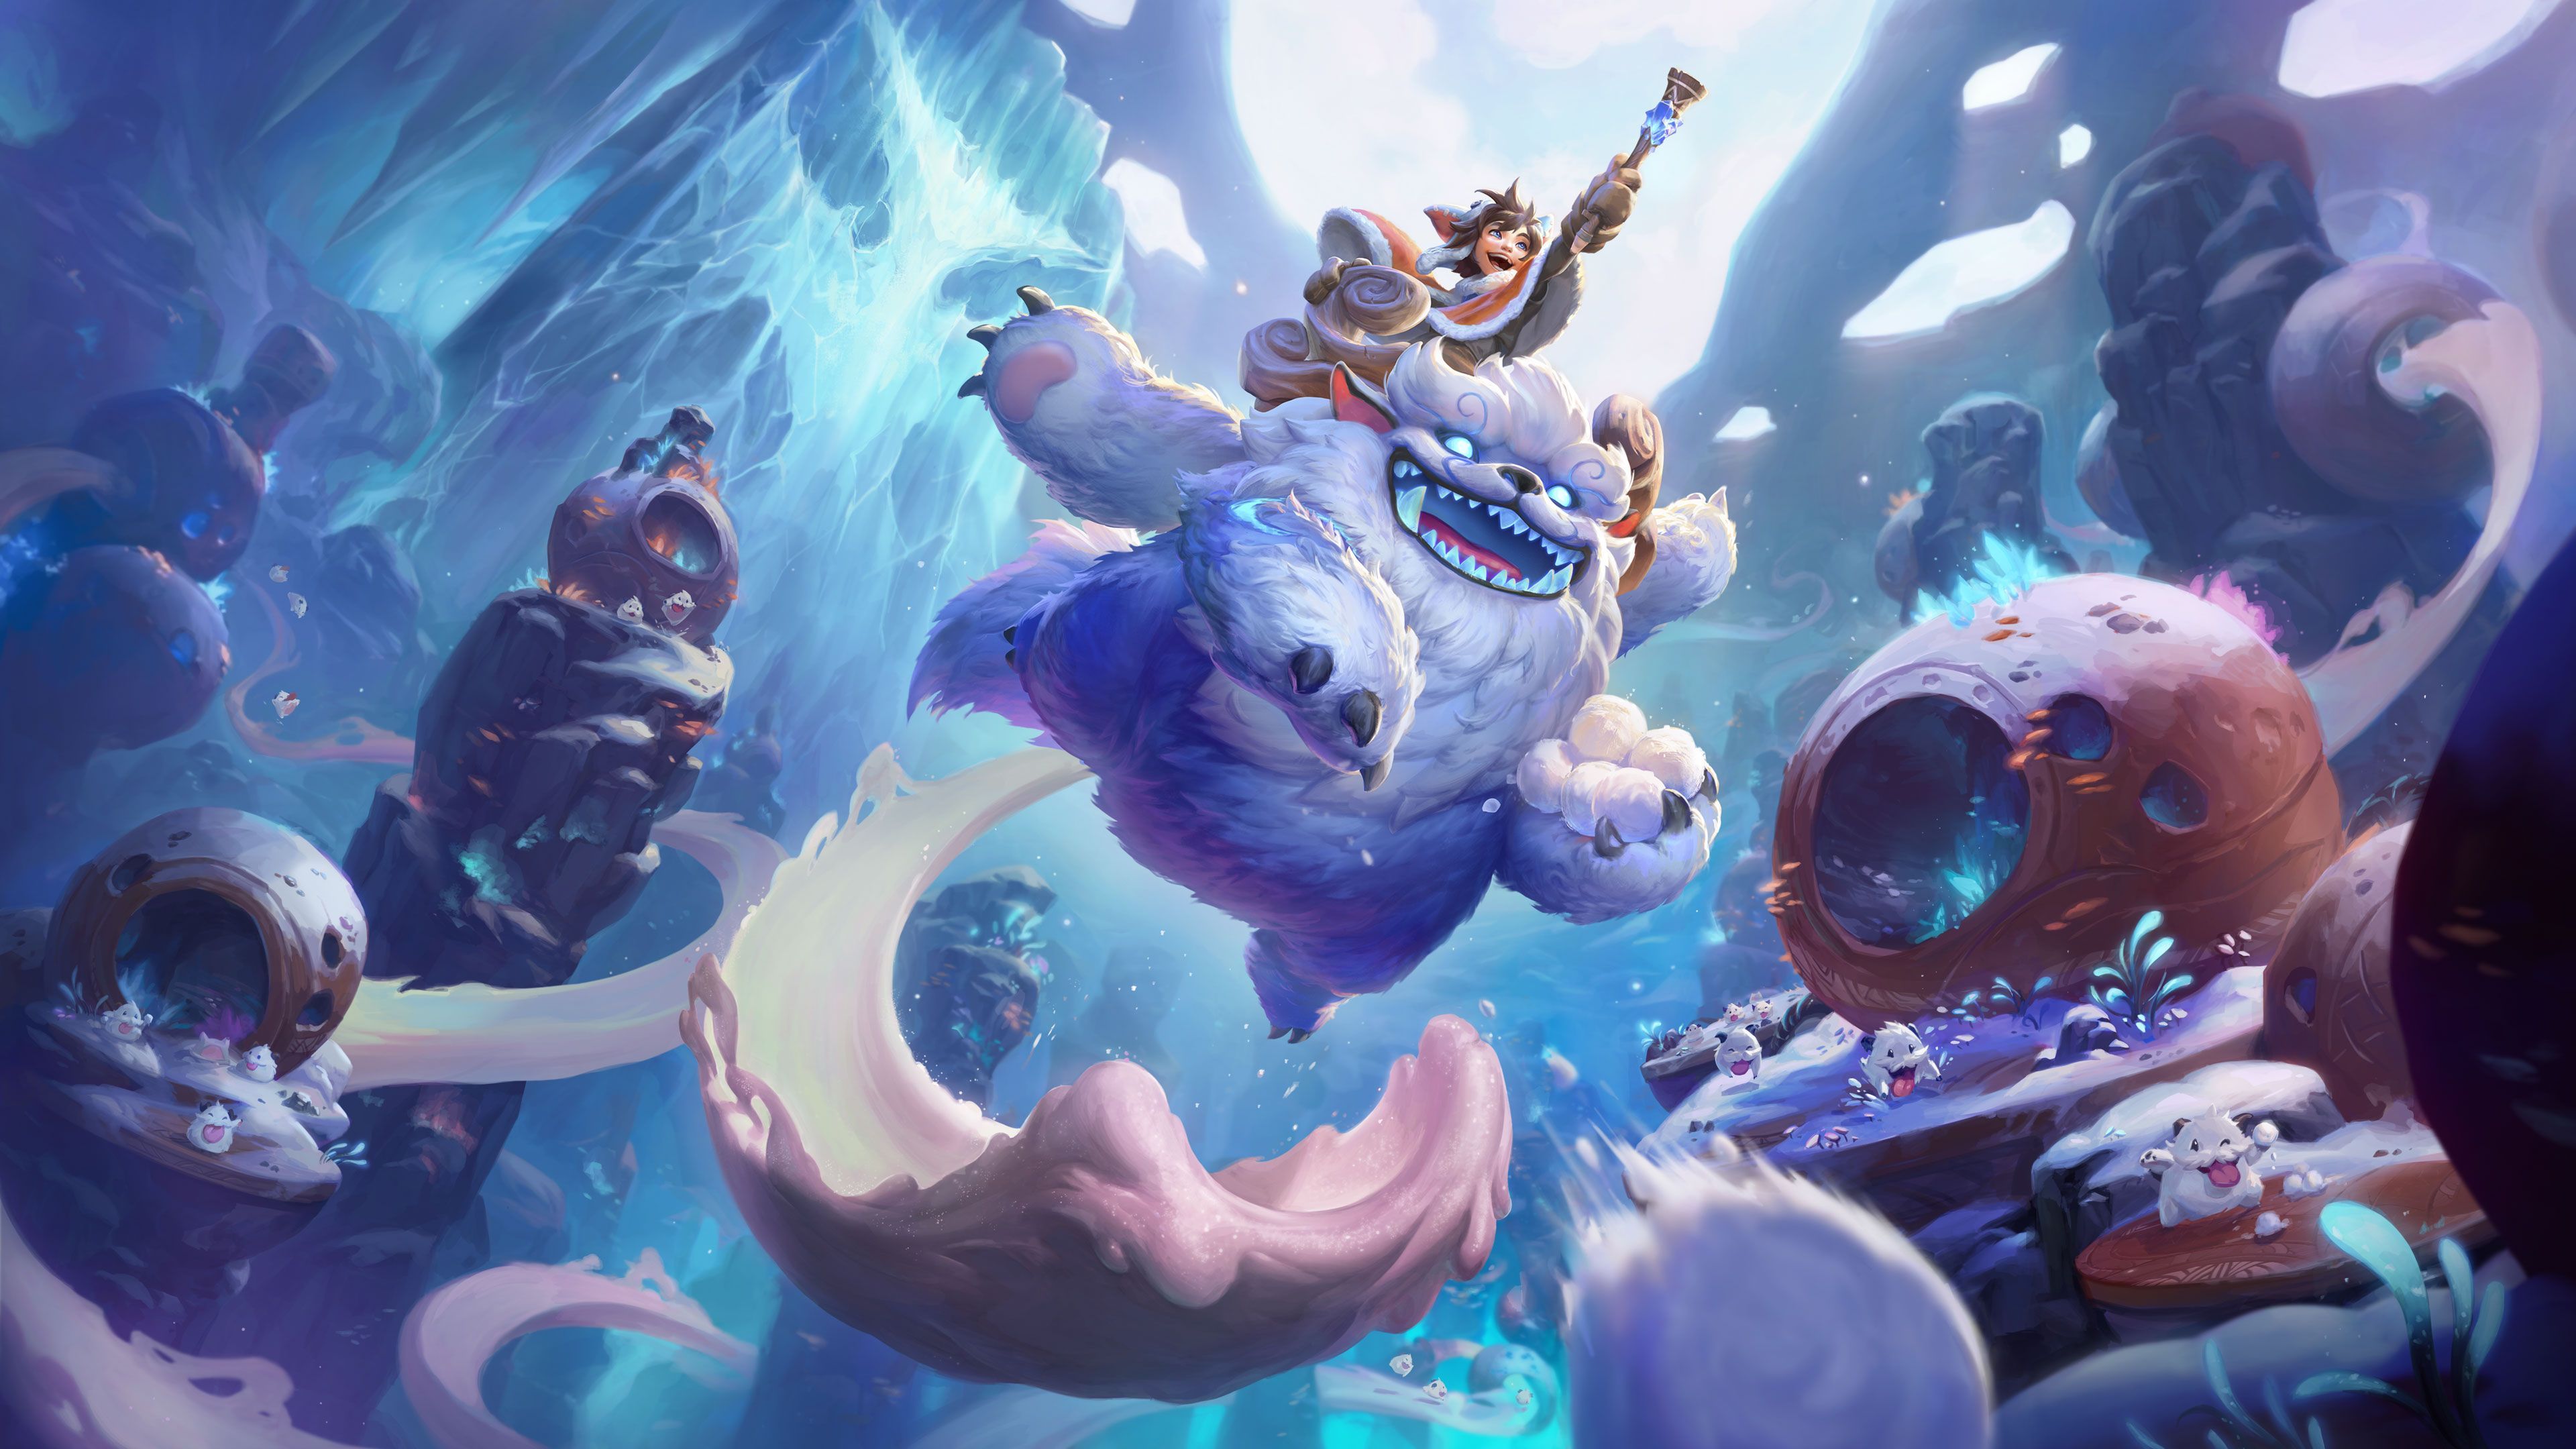 Key art for Song of Nunu showing Nunu and Willump exploring the frozen lands of the Freljord